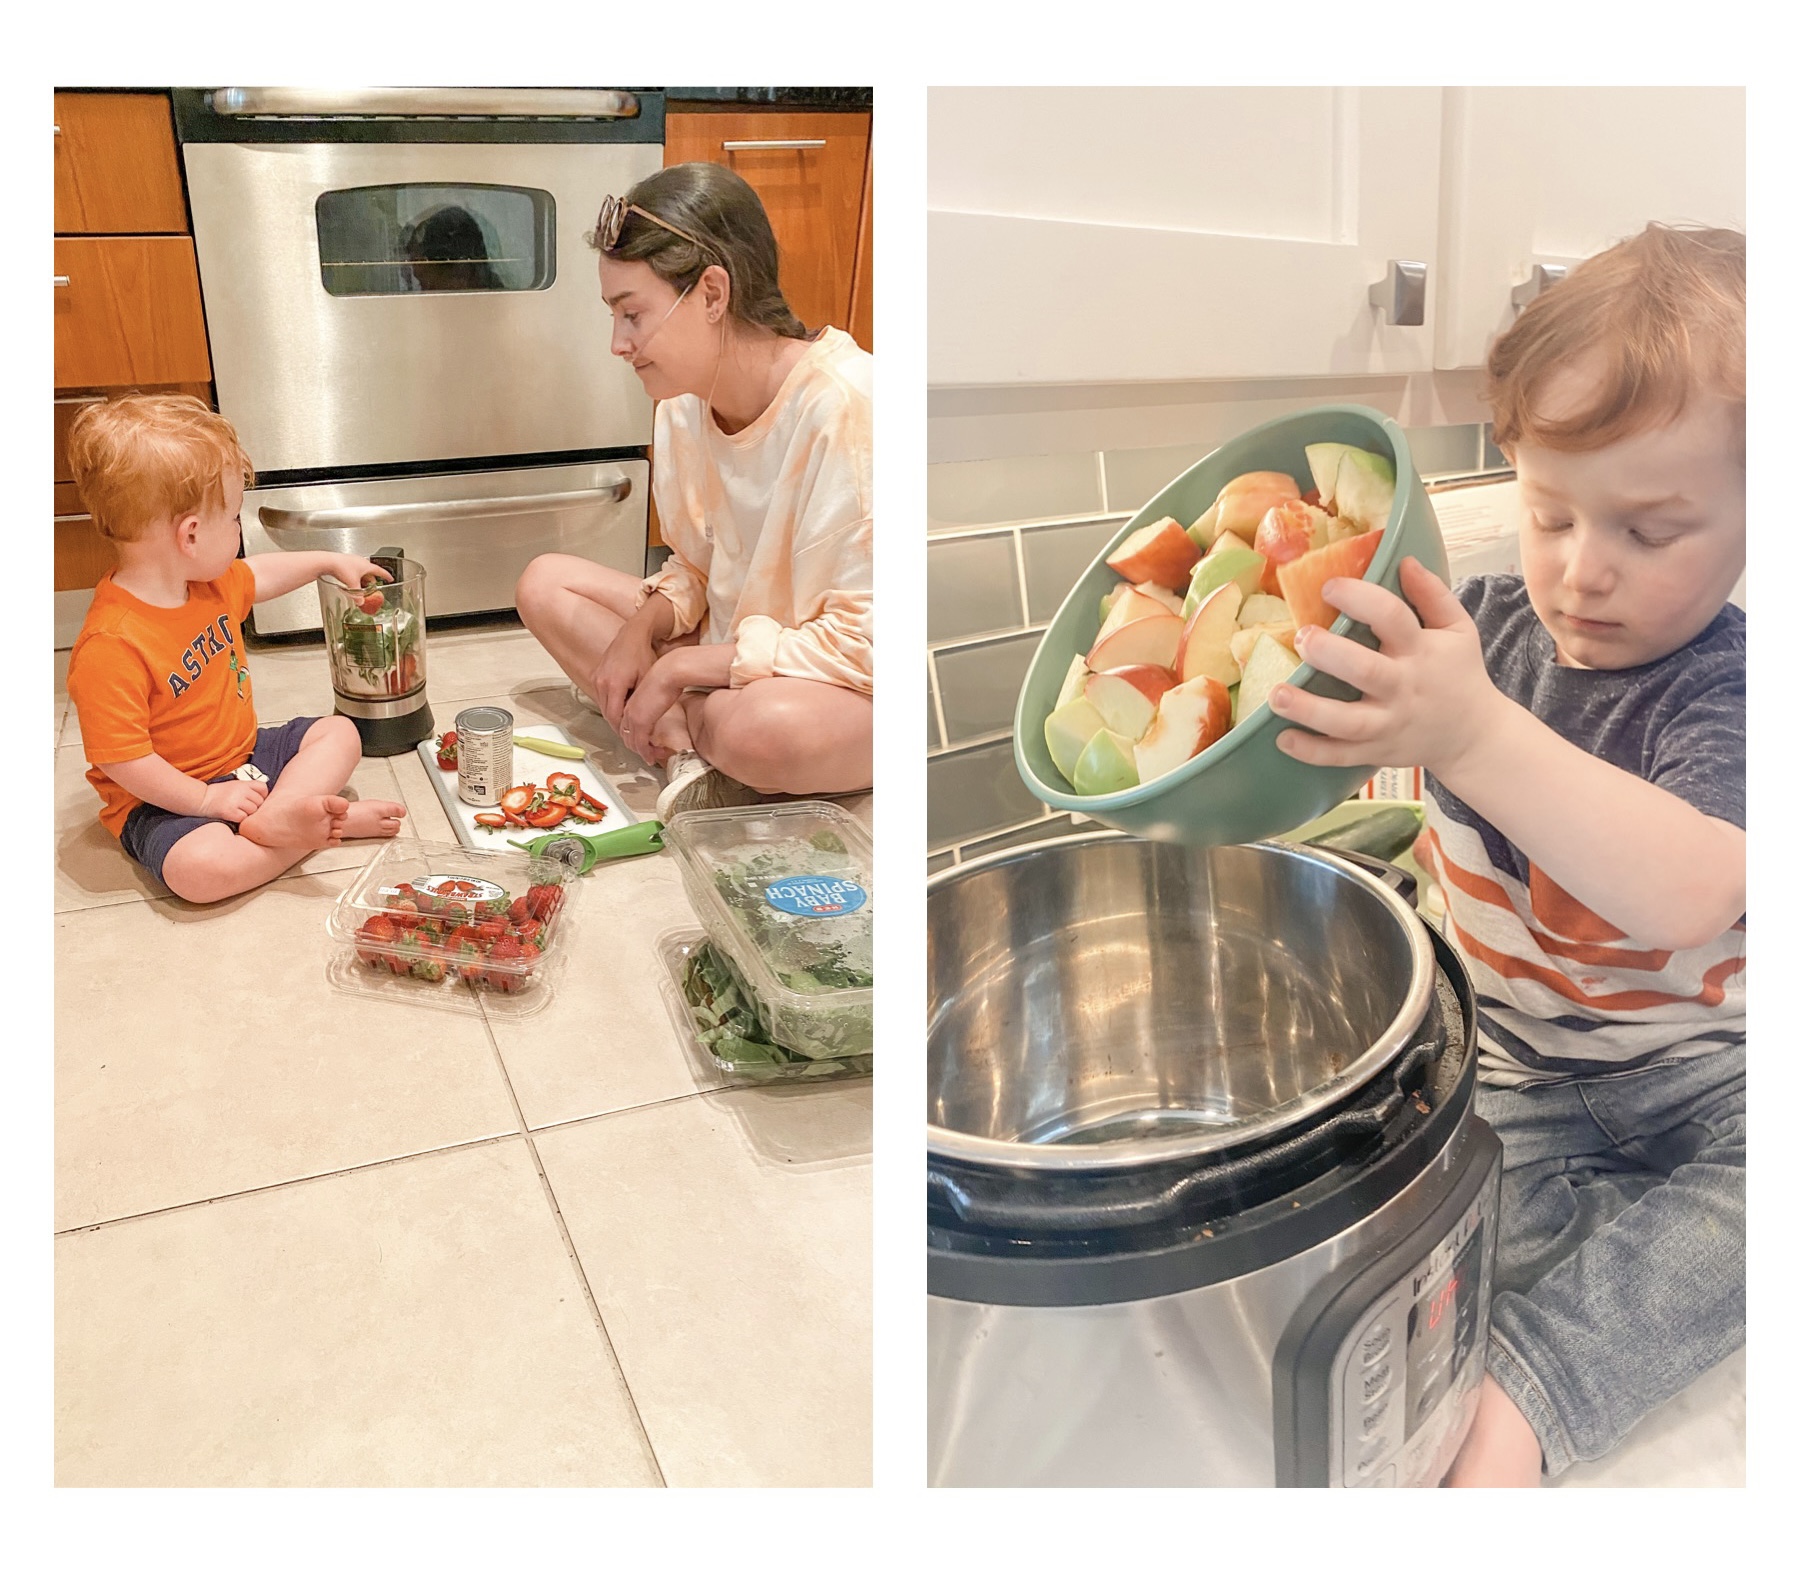 mom and toddler sit on kitchen floor preparing food